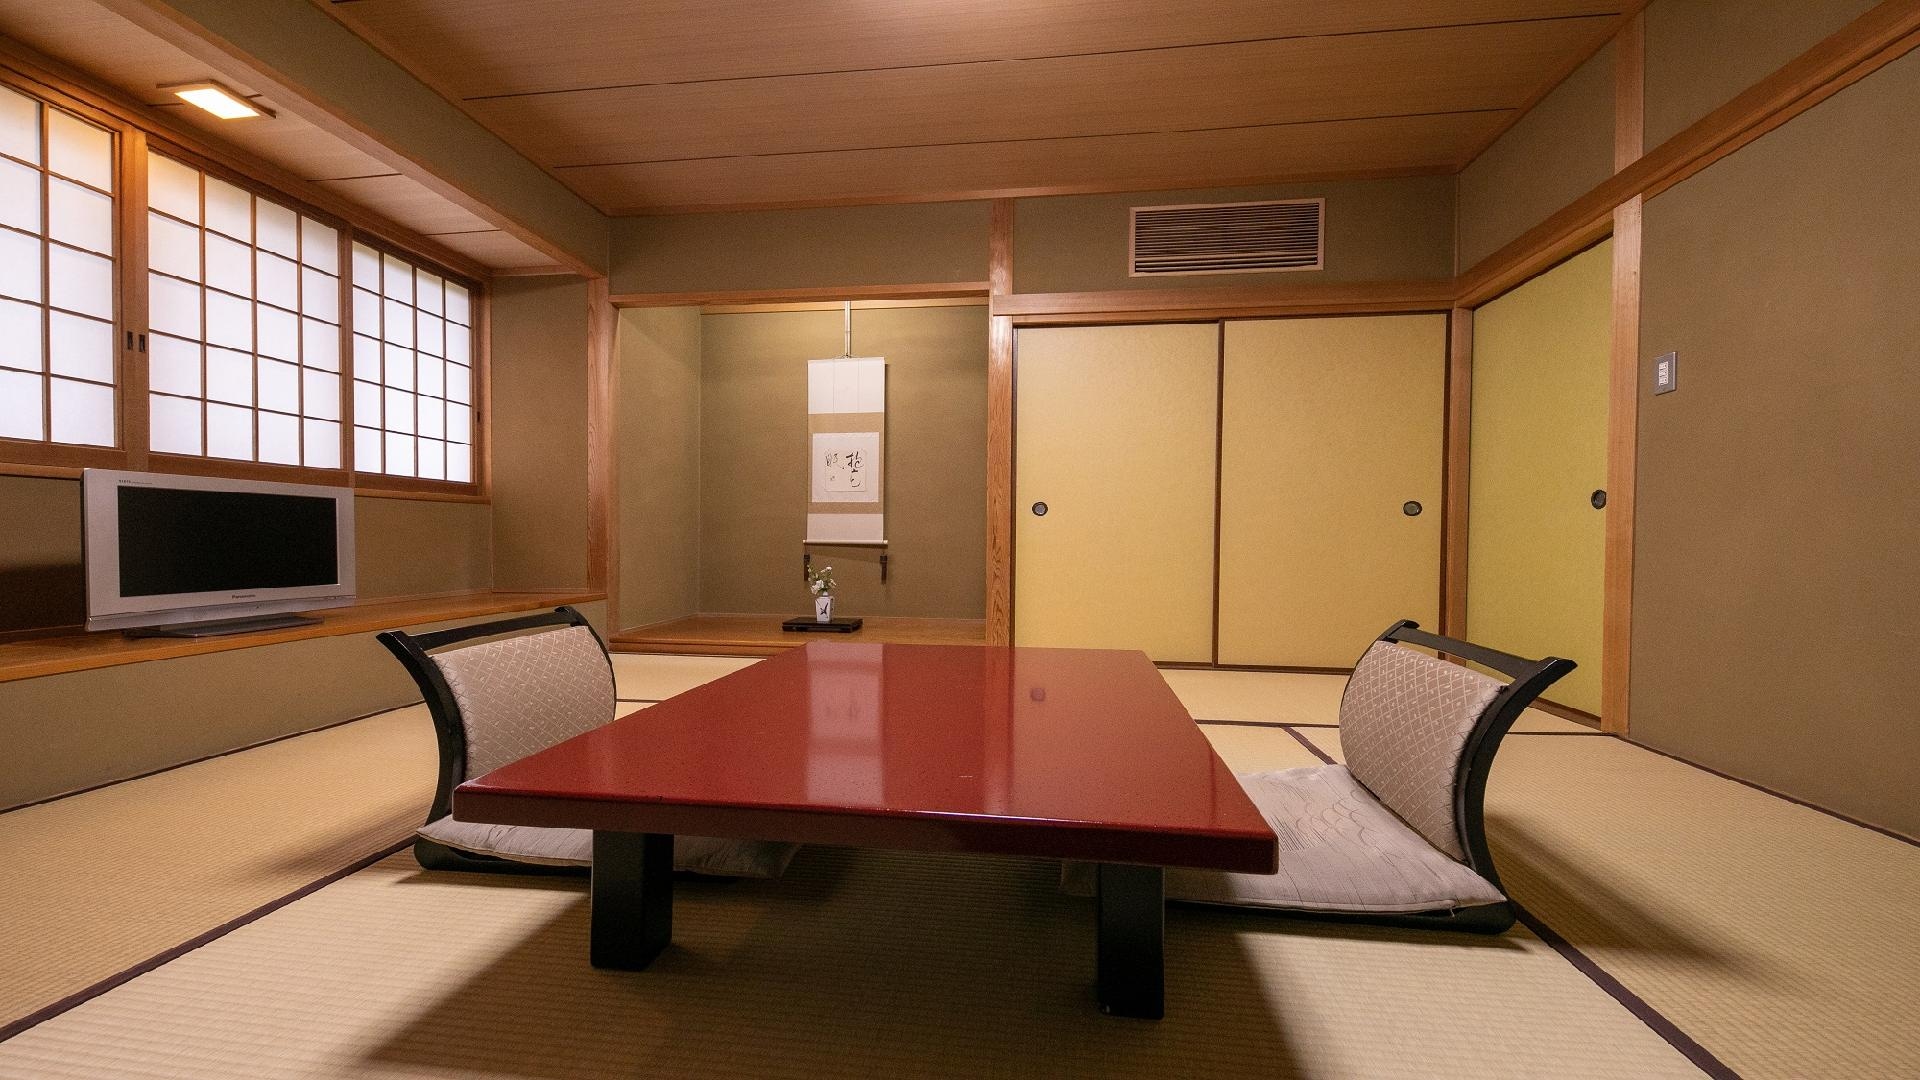 without bath room(japanese style)